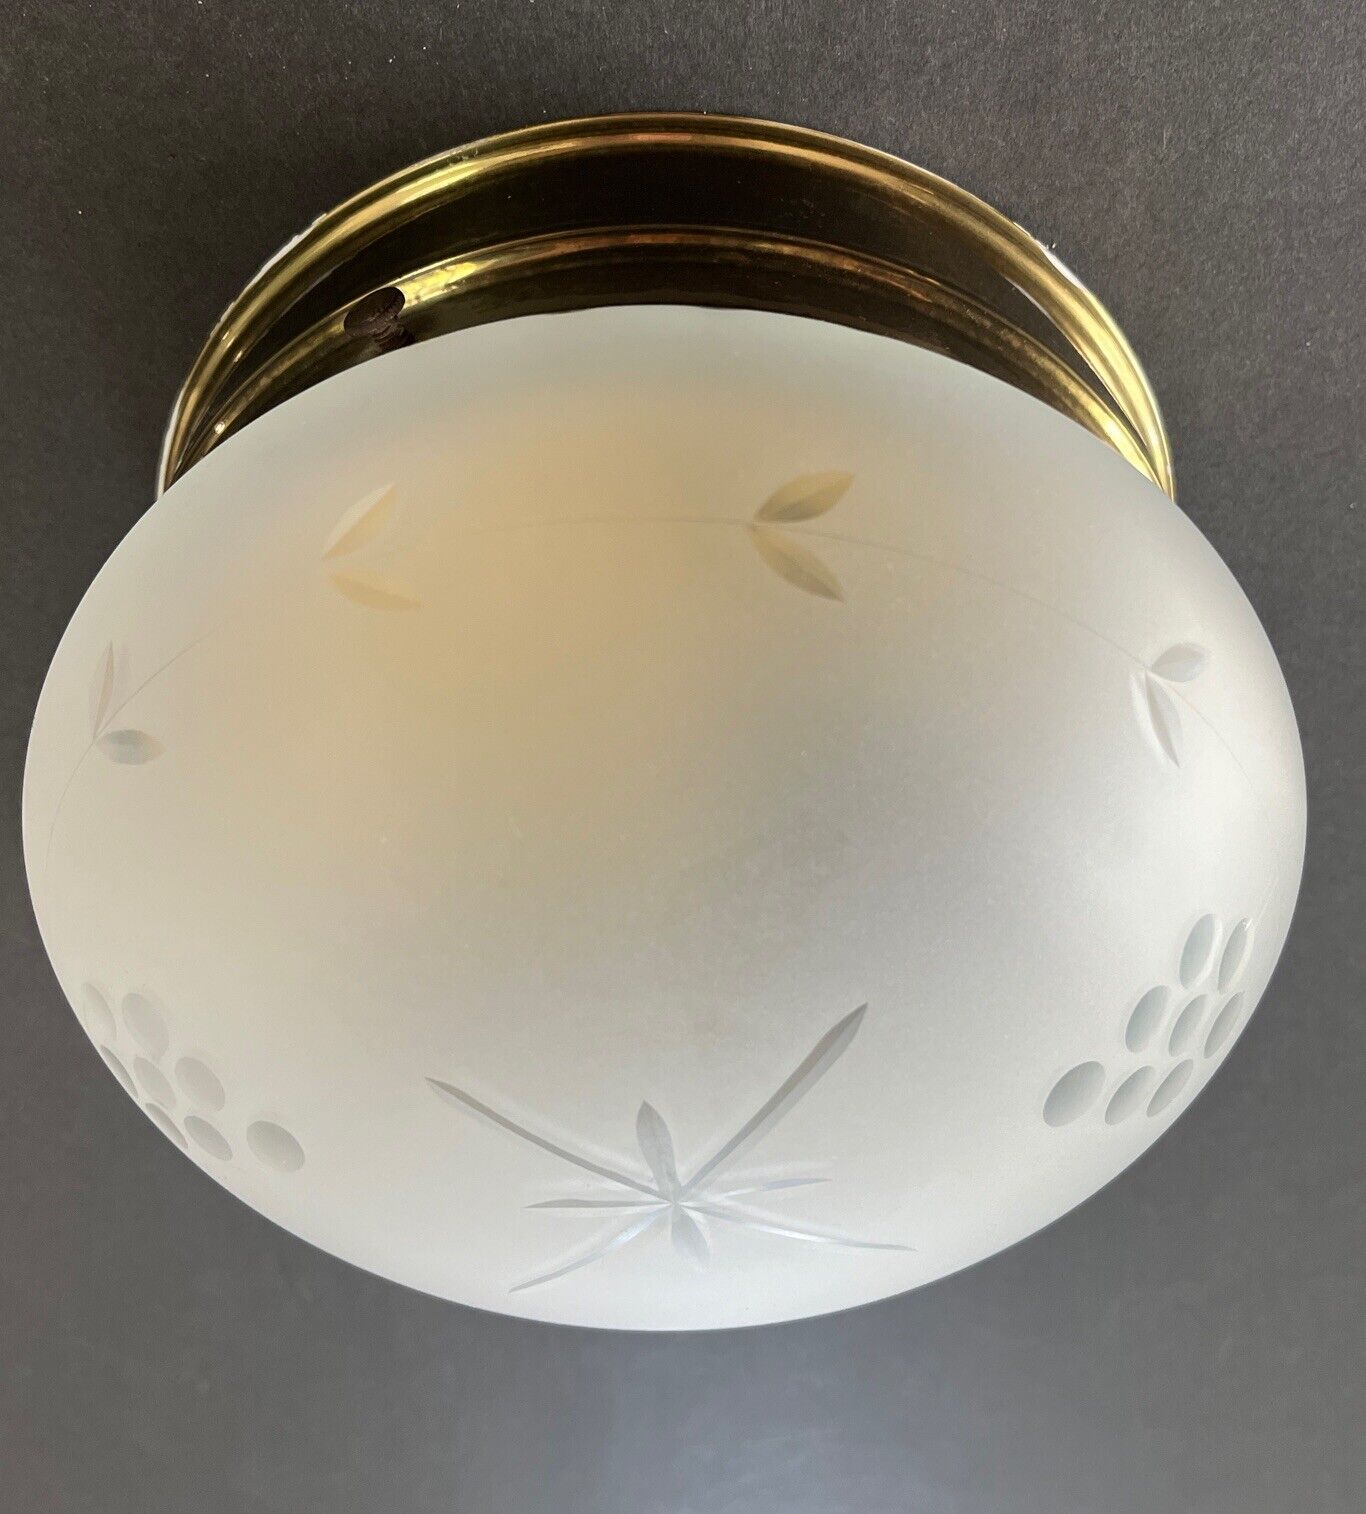 Vintage Mid Century Modern Ceiling Light Fixture Frosted Cut Etched Glass Globe